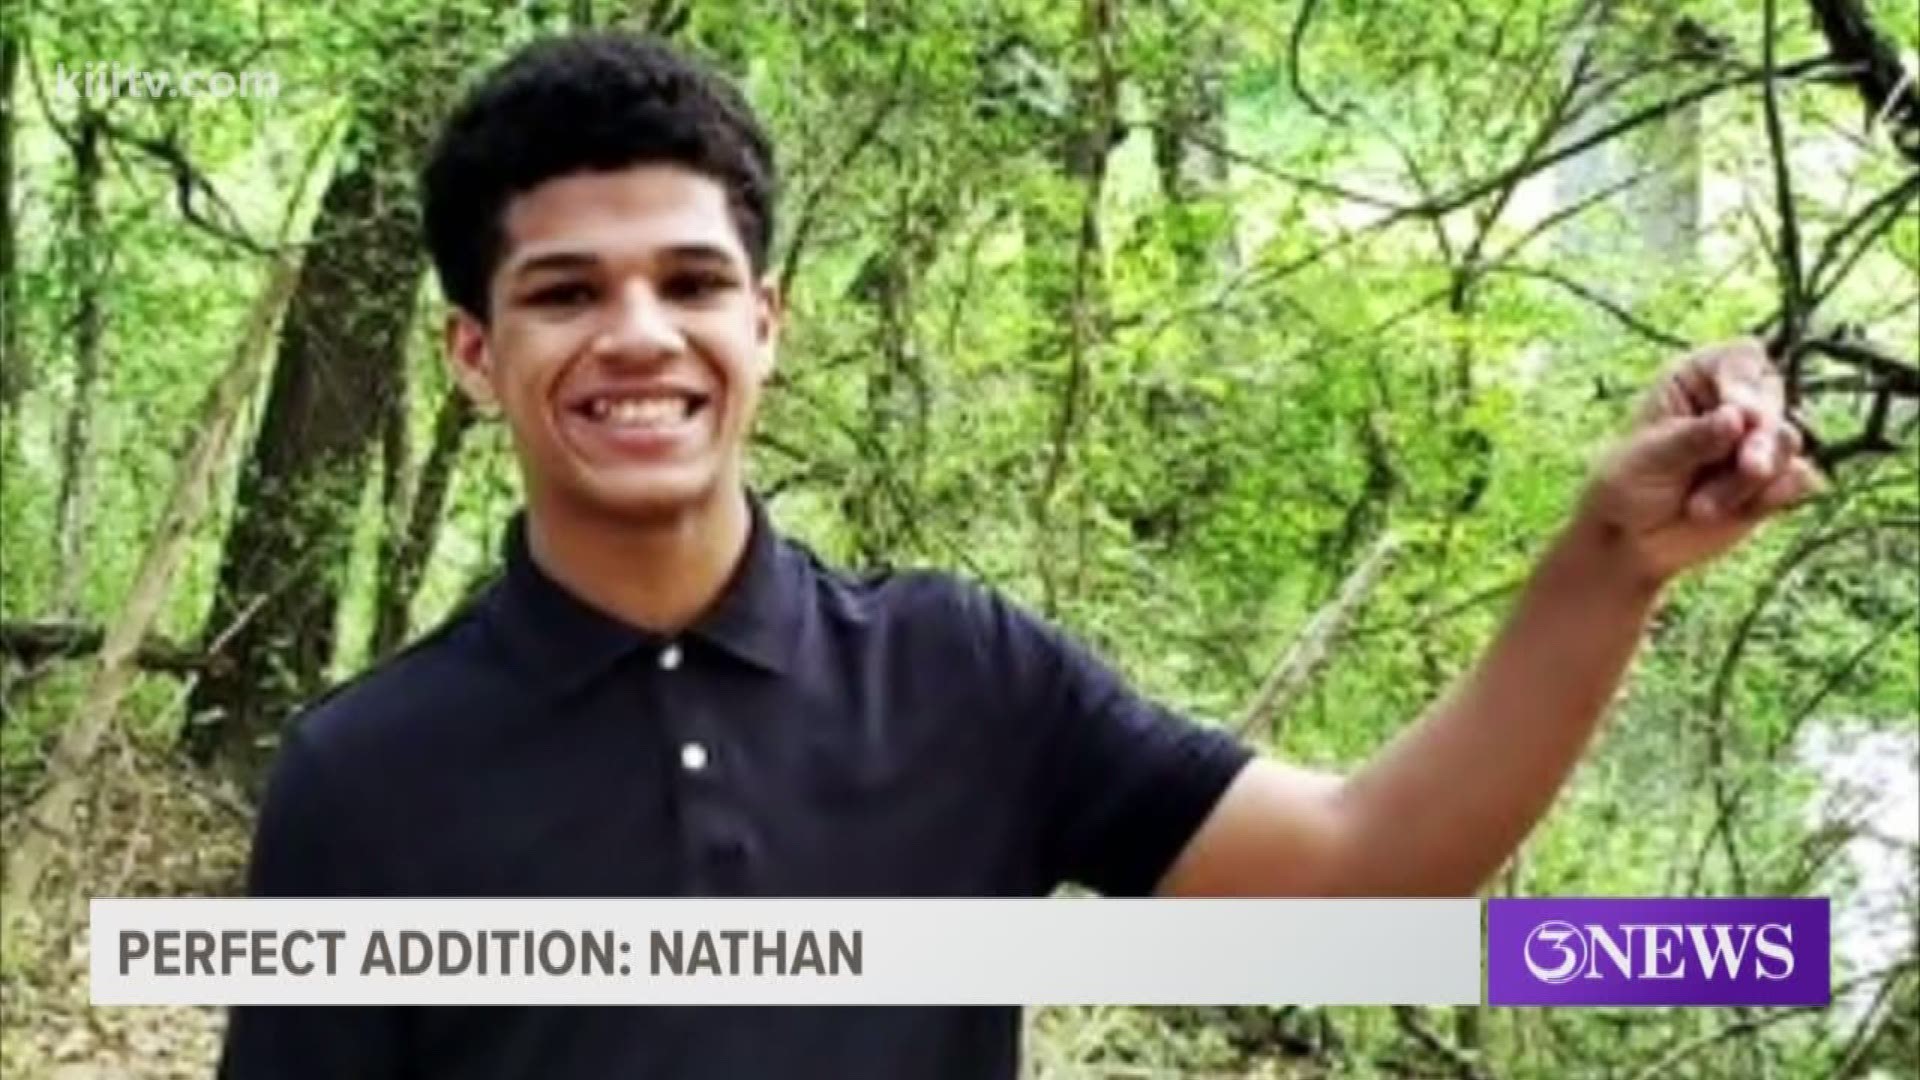 Nathan kicks off our new series 'Perfect Addition' looking for that family to love him. Once a week we will feature of great kid on First Edition.